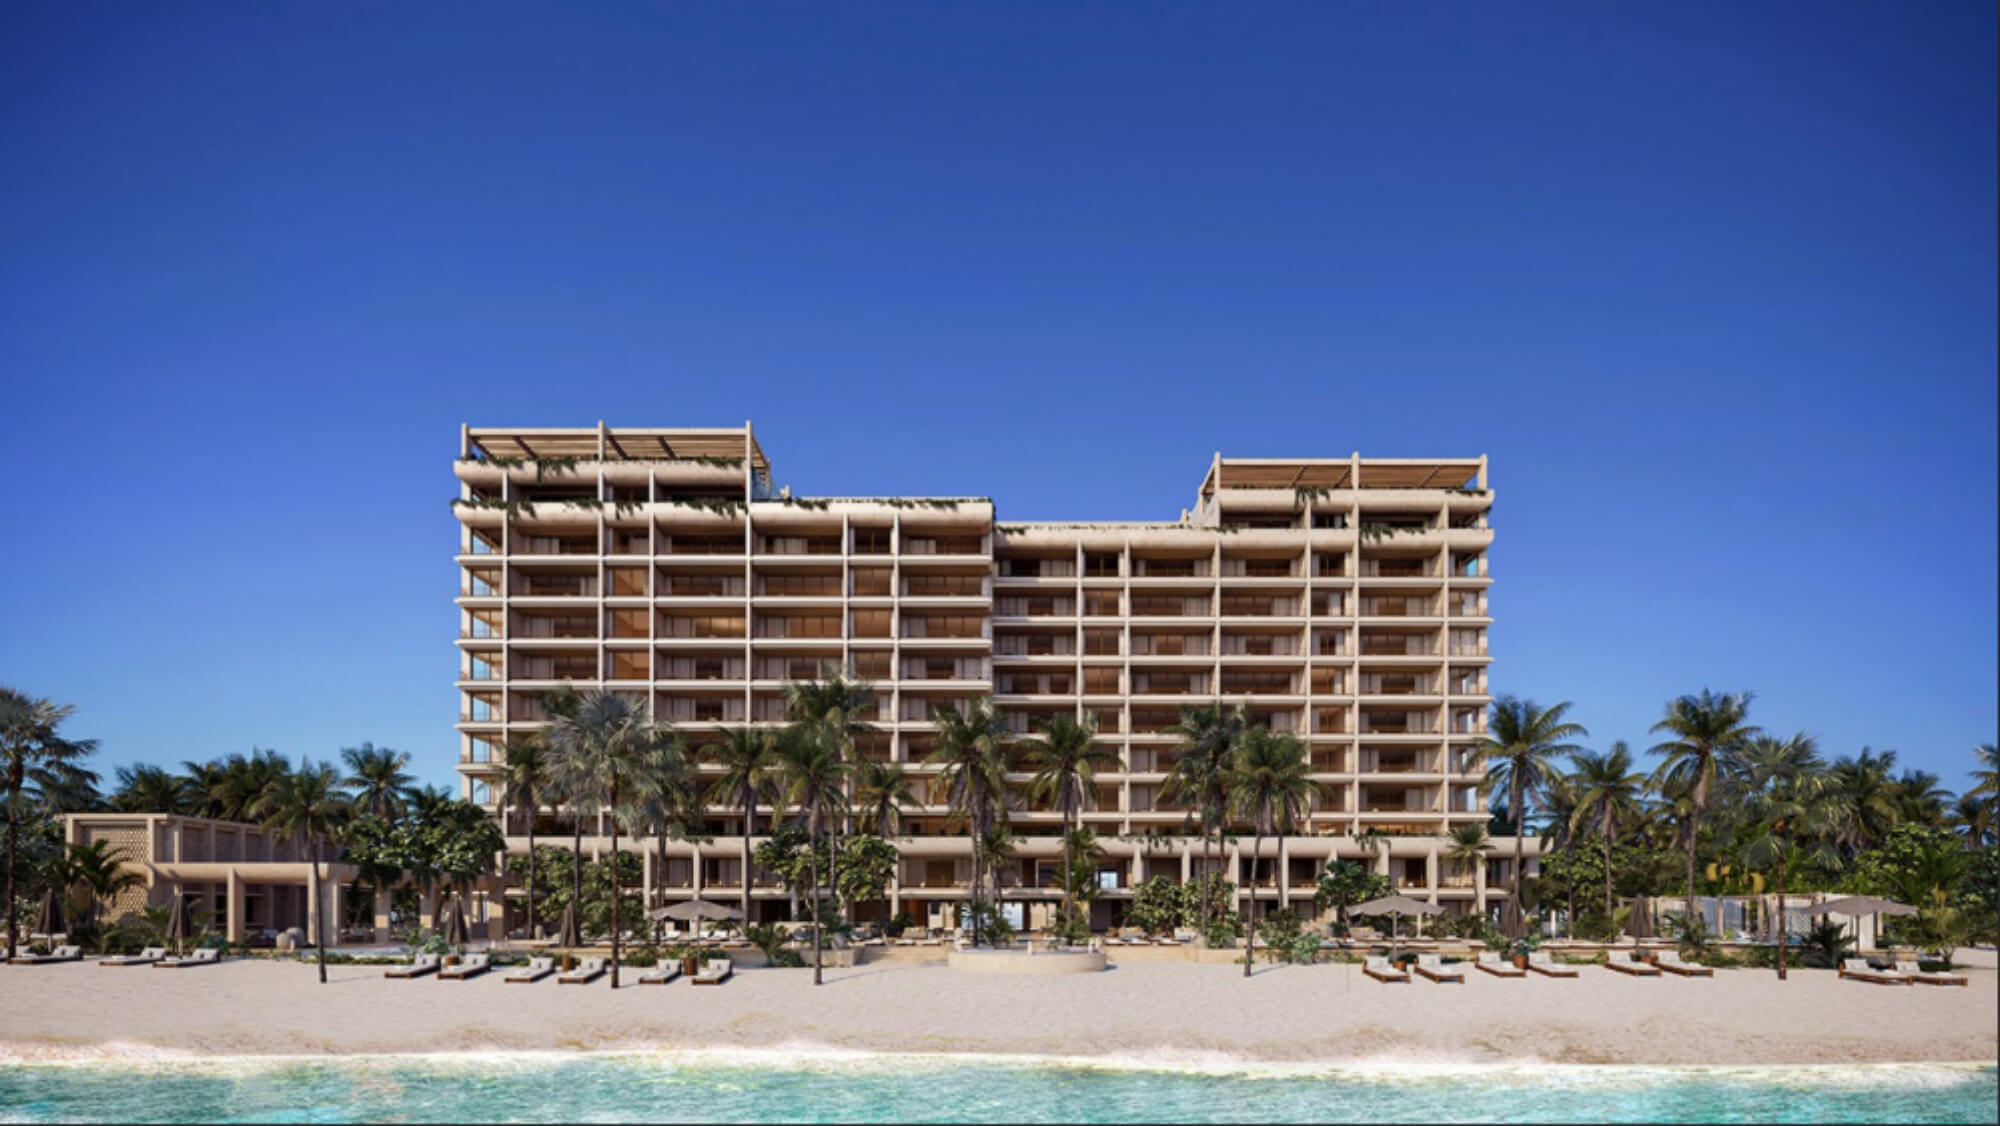 Condominium with amenities for the whole family, 25 amenities, for sale Merida, North Zone.